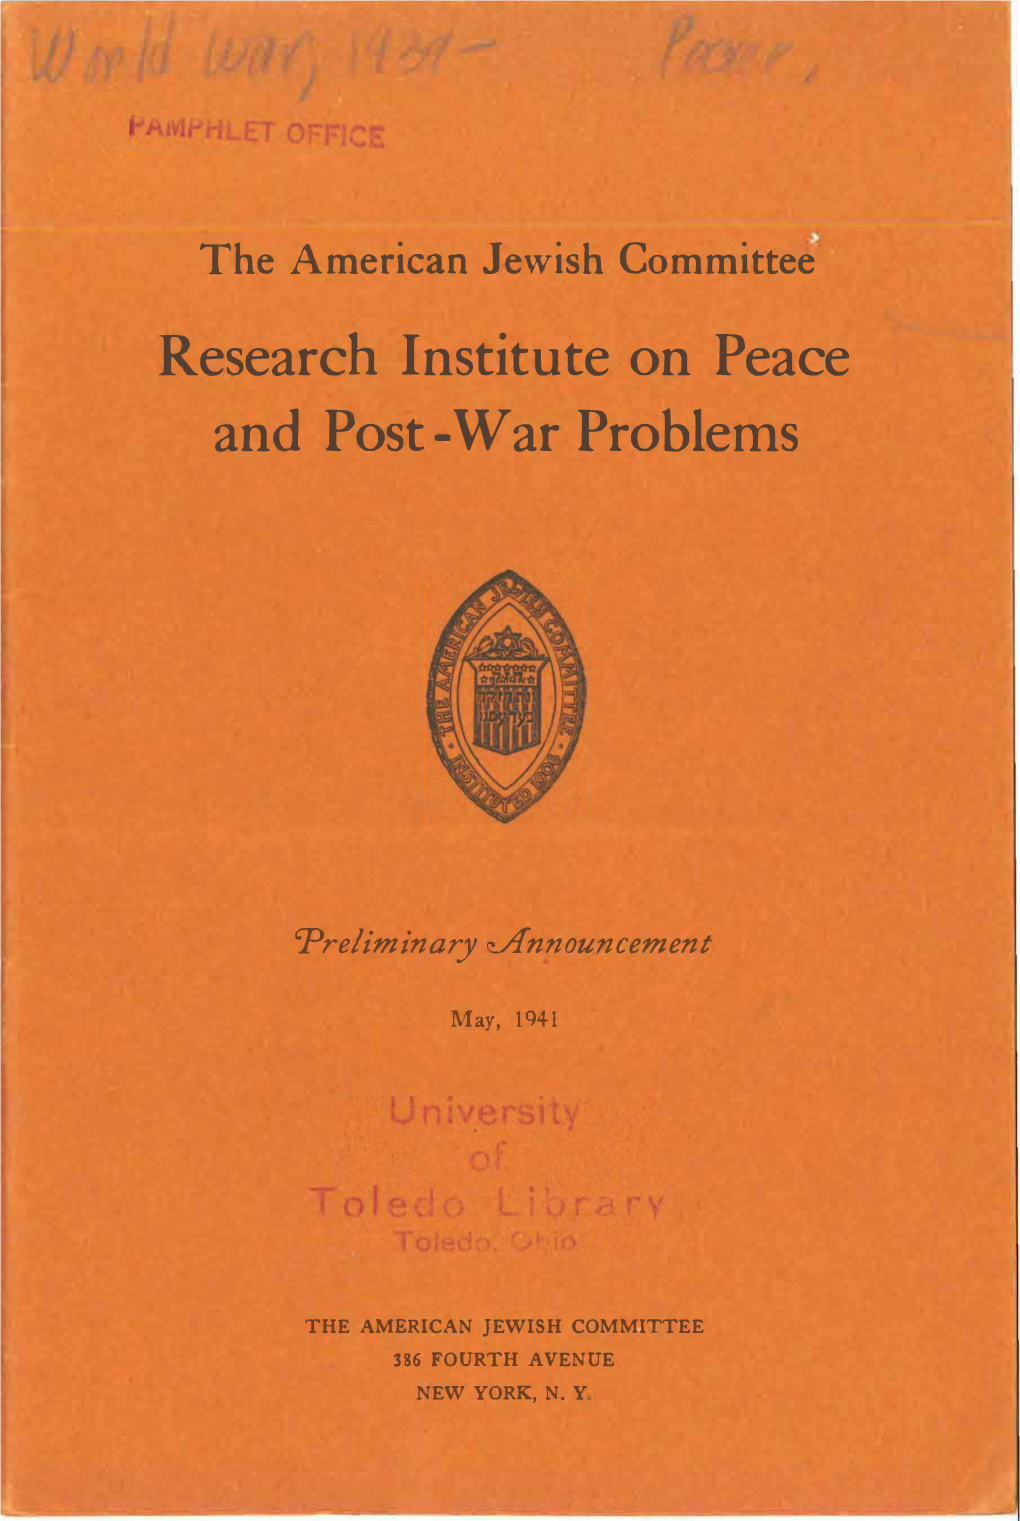 Research Institute on Peace and Post-War Problems